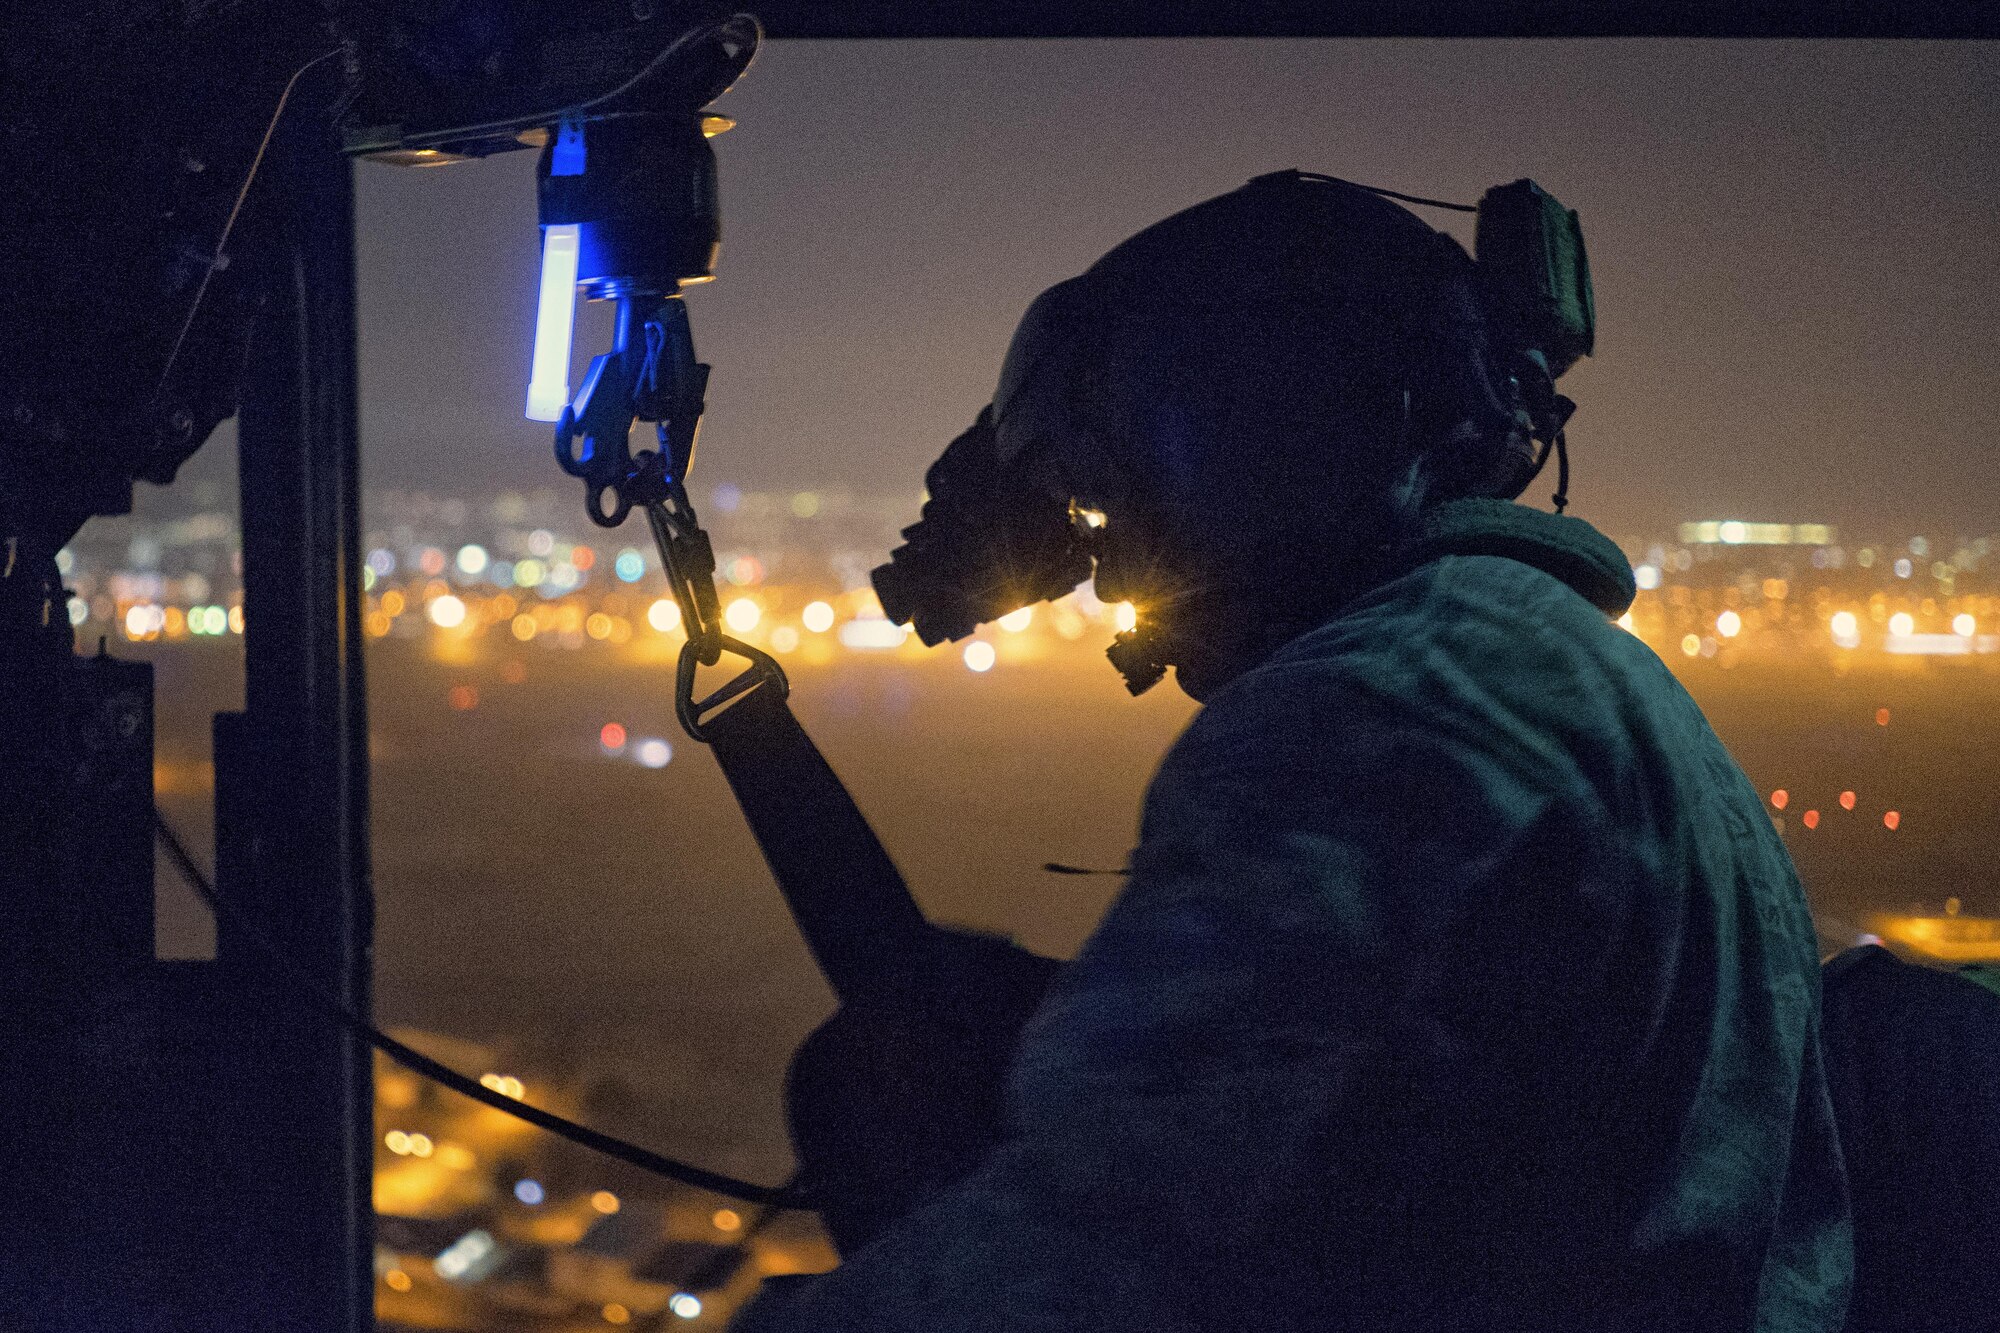 Tech. Sgt. Michael Wright, 459th Airlift Squadron UH-1N Huey flight engineer, reels in a UH-1N hoist cable at Yokota Air Base, Japan, Feb. 23, 2016. For 459th AS special missions aviators to become certified to operate the hoist, SMA instructors with the 512th Rescue Squadron, Kirtland AFB, New Mexico, and the 36th RQS, Fairchild AFB, Washington, arrived at Yokota to train alongside flight engineers. The requalification process included day and night hoist operations with instructor supervision. (U.S. Air Force photo by Airman 1st Class Delano Scott/Released)